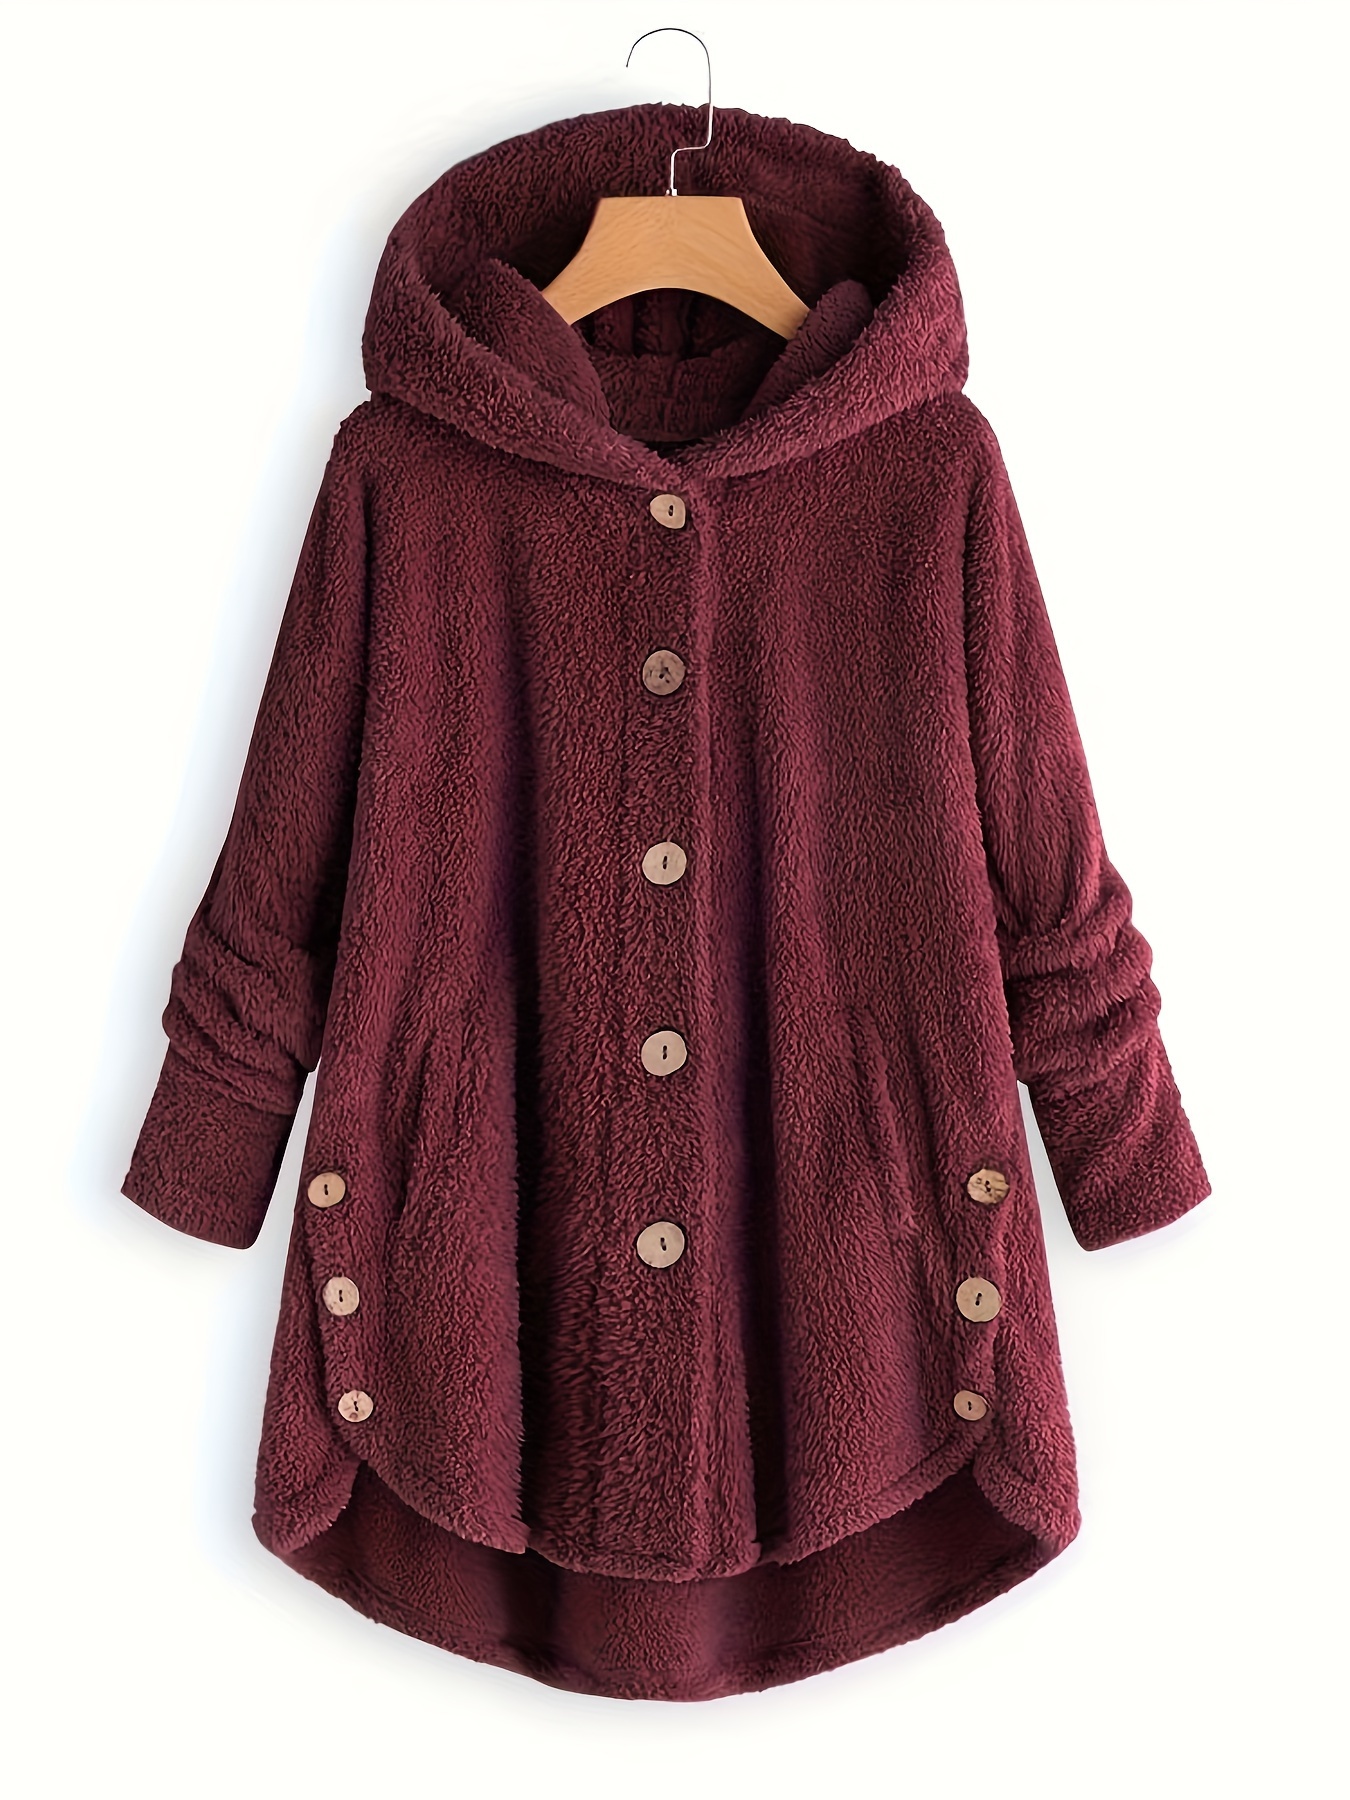 button front teddy bear hoodie casual long sleeve slant pockets plush coat womens clothing details 6